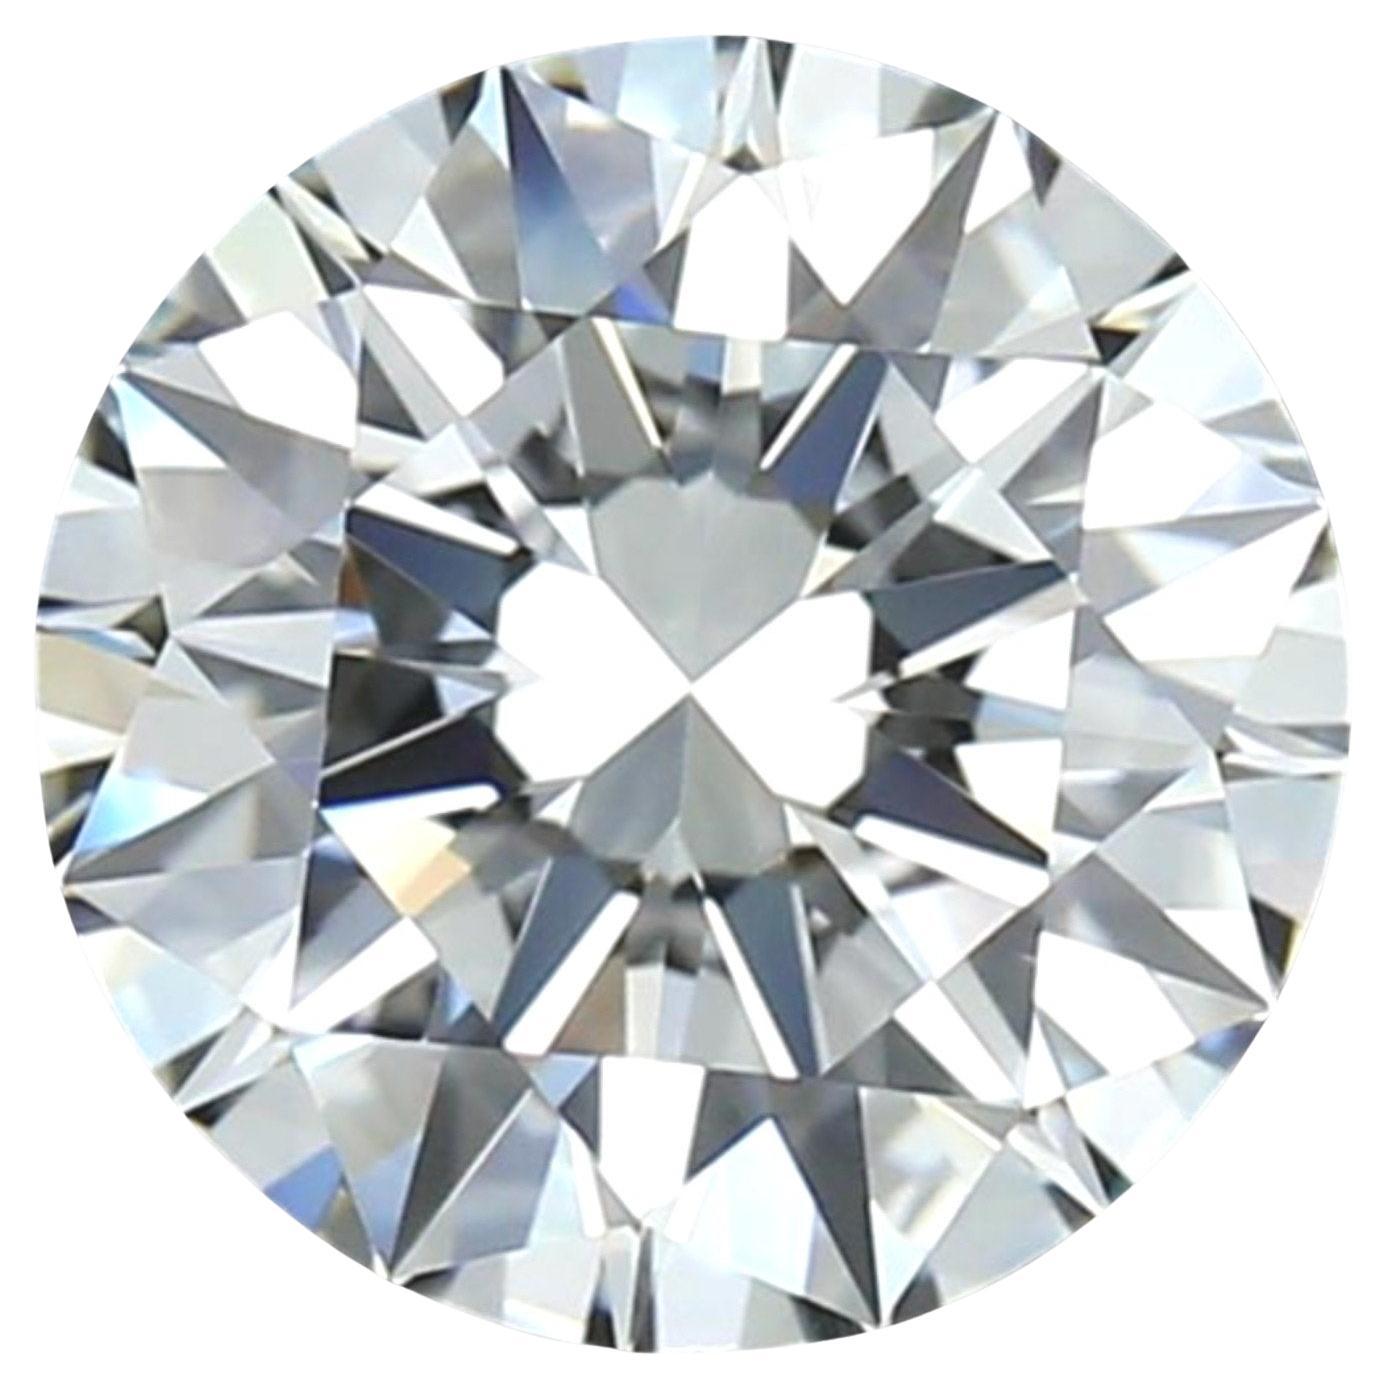 Dazzling 1 pc Natural Diamond 1.03 ct Round I VVS1 GIA Certificate For Sale